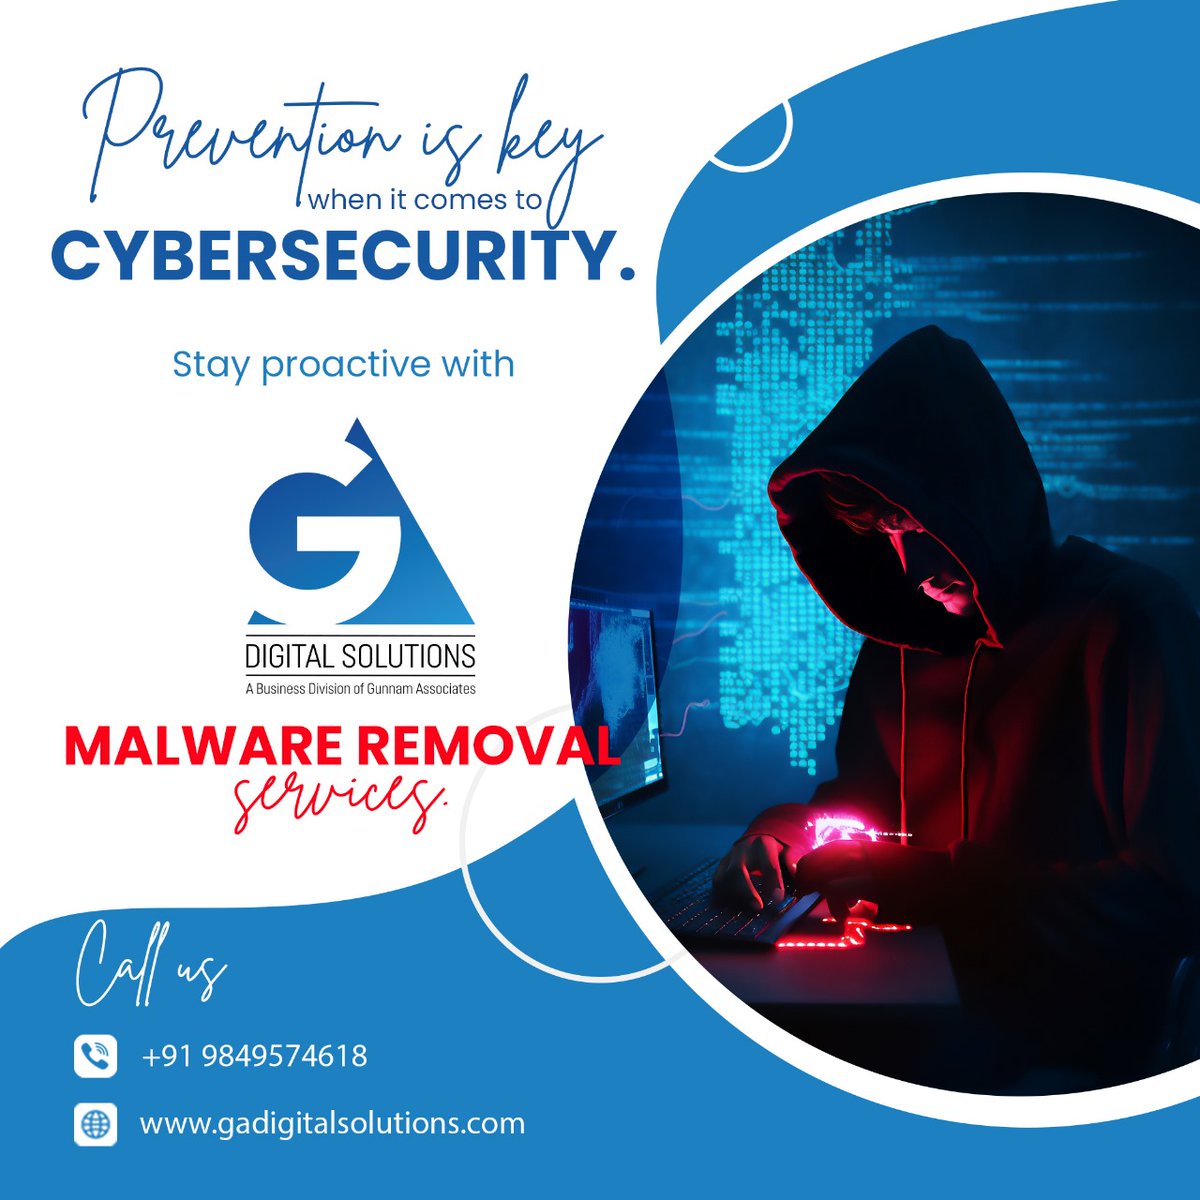 Our team will continuously monitor and protect your website from malware threats, ensuring uninterrupted operation and peace of mind. Protect what matters most – choose GA Digital Solutions
#gadigitalsolutions #websitedevelopment #MalwareRemoval #WebsiteSecurity #Website